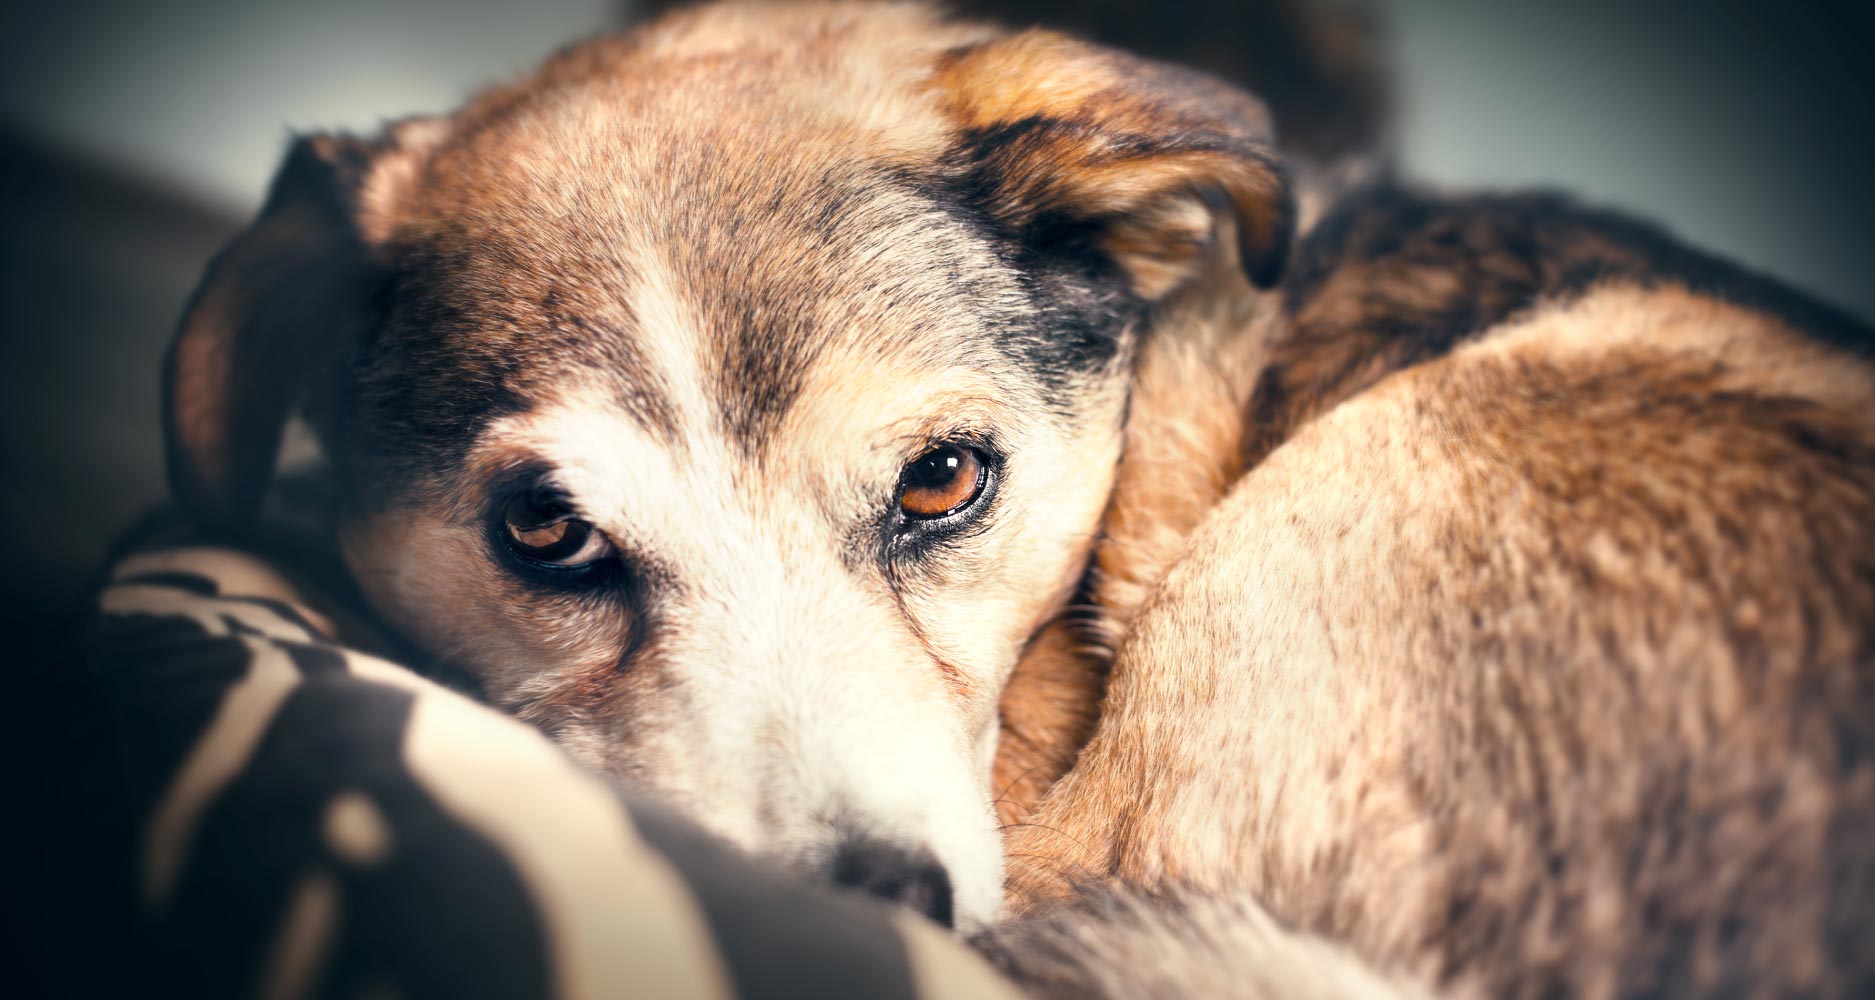 The Most Common Dog Phobias and Fears - PetlifeSA